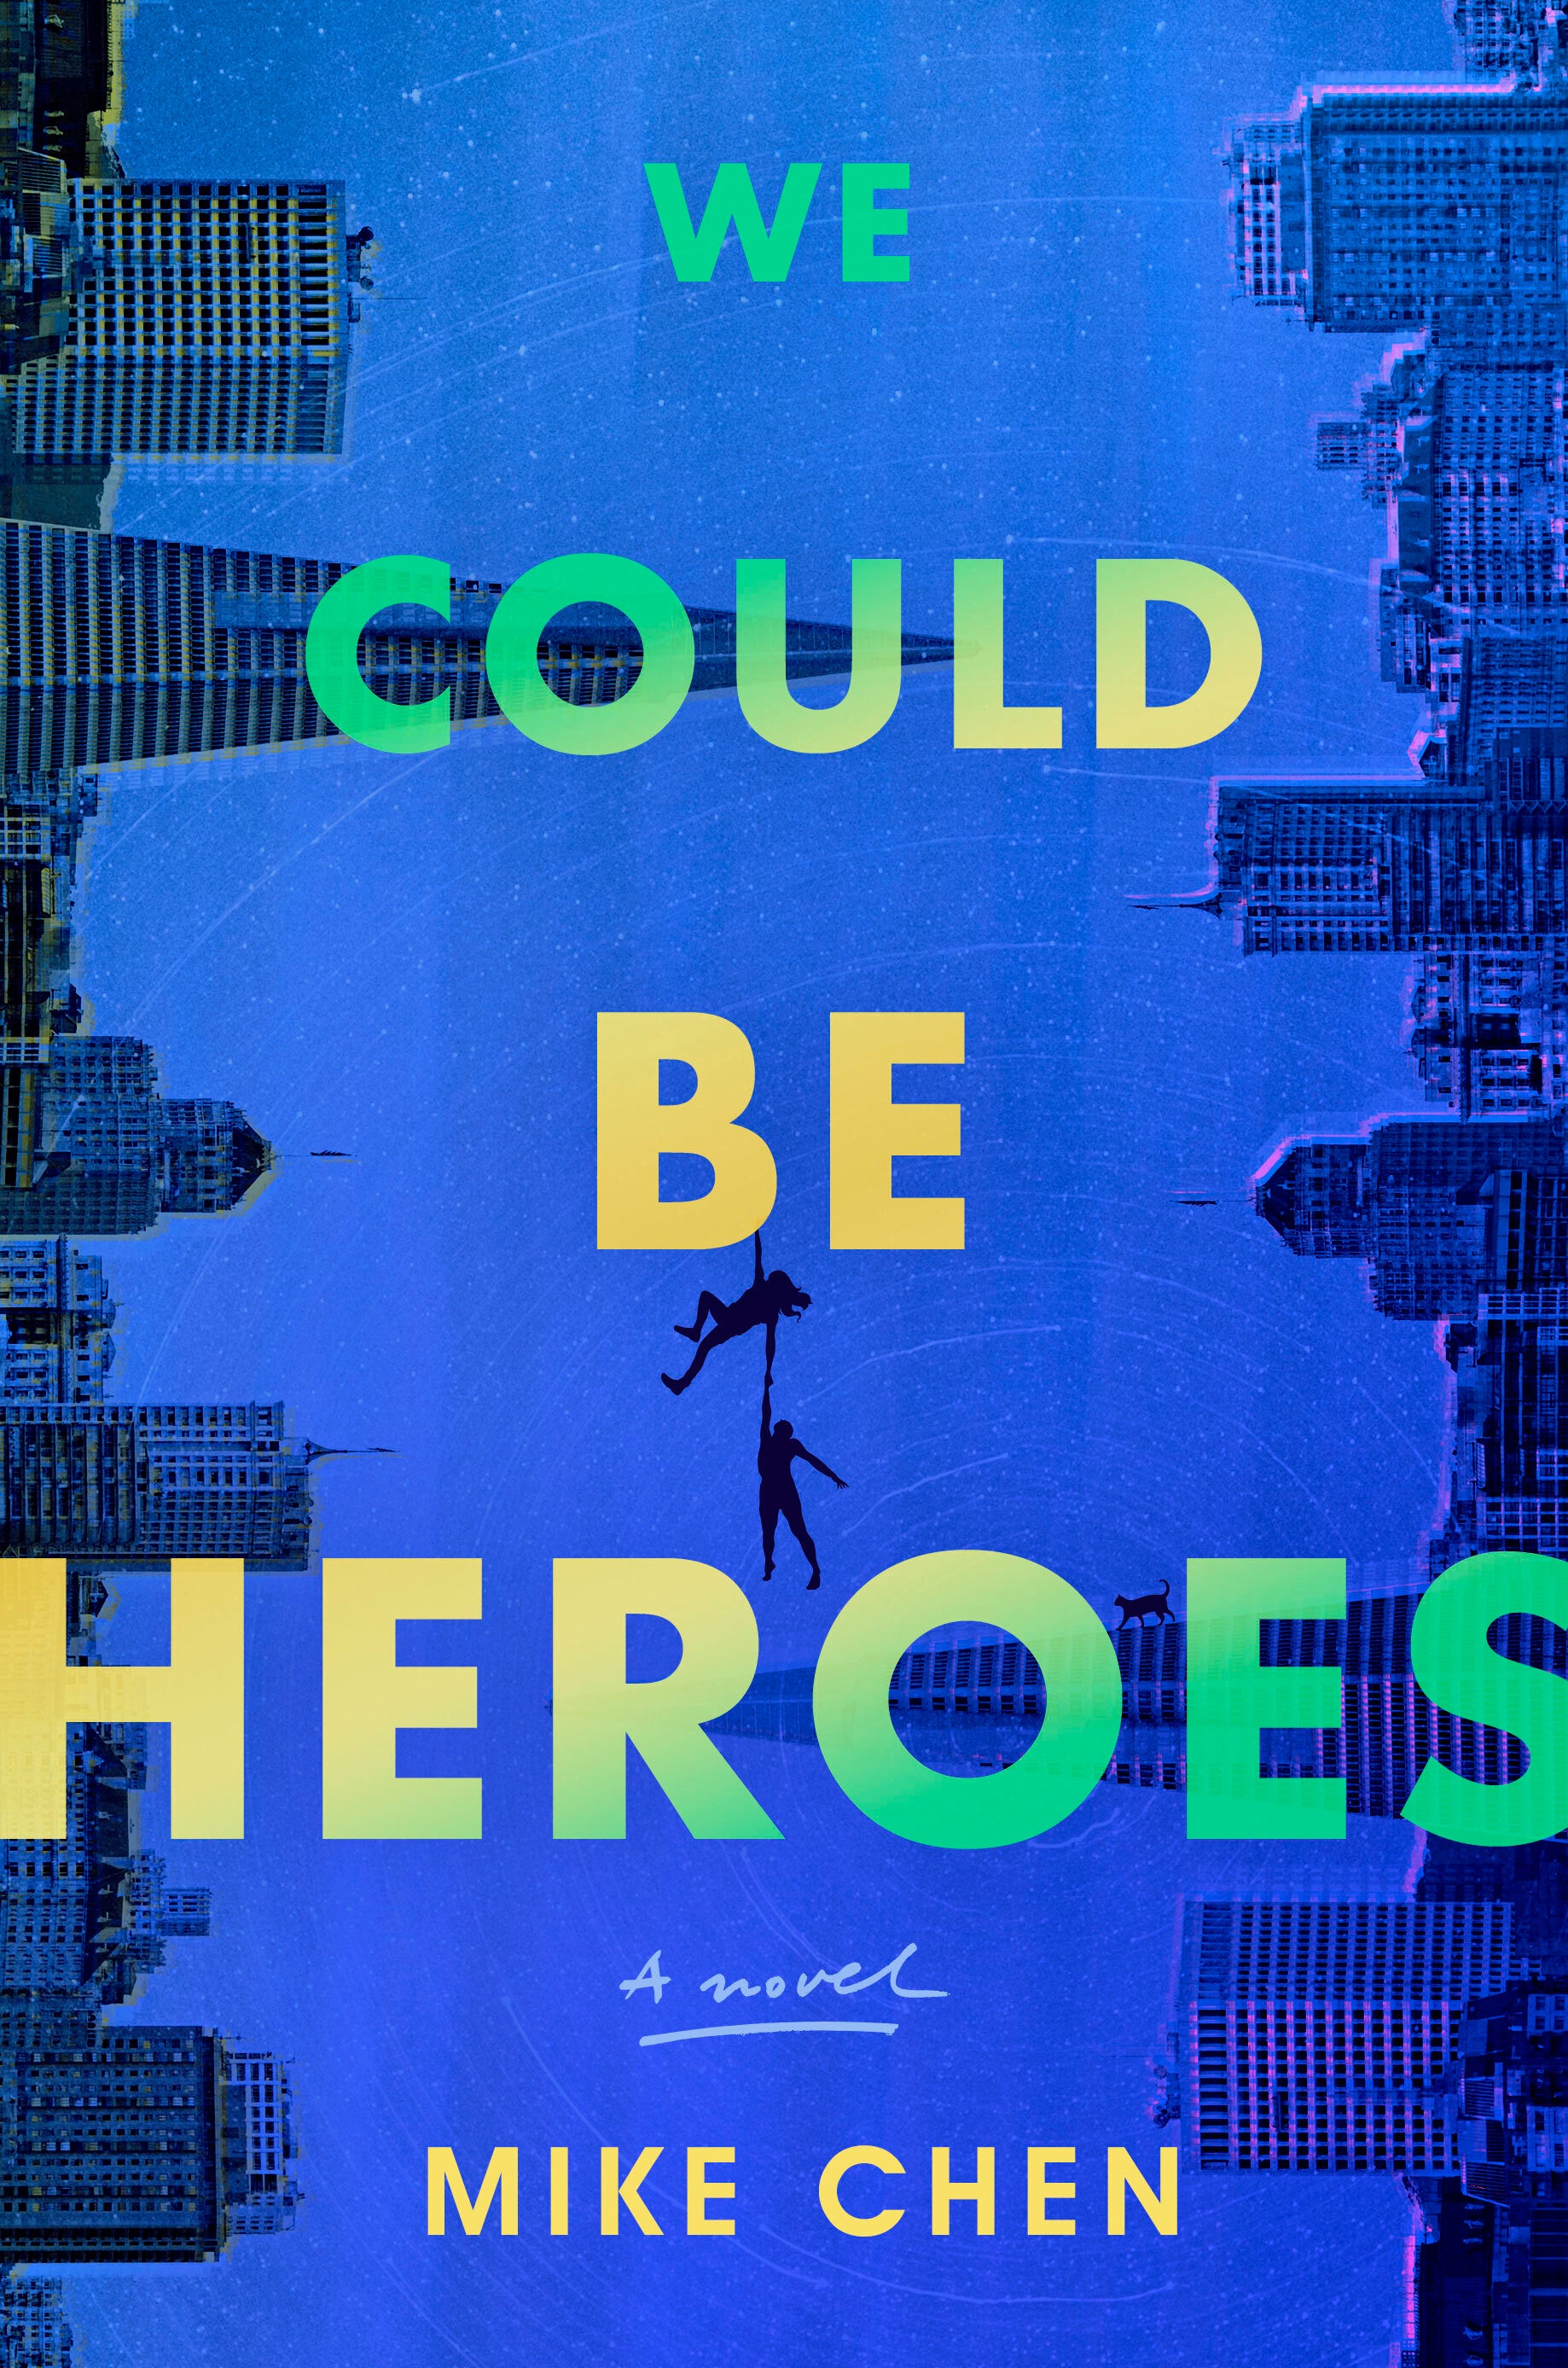 Book Review - We Could Be Heroes